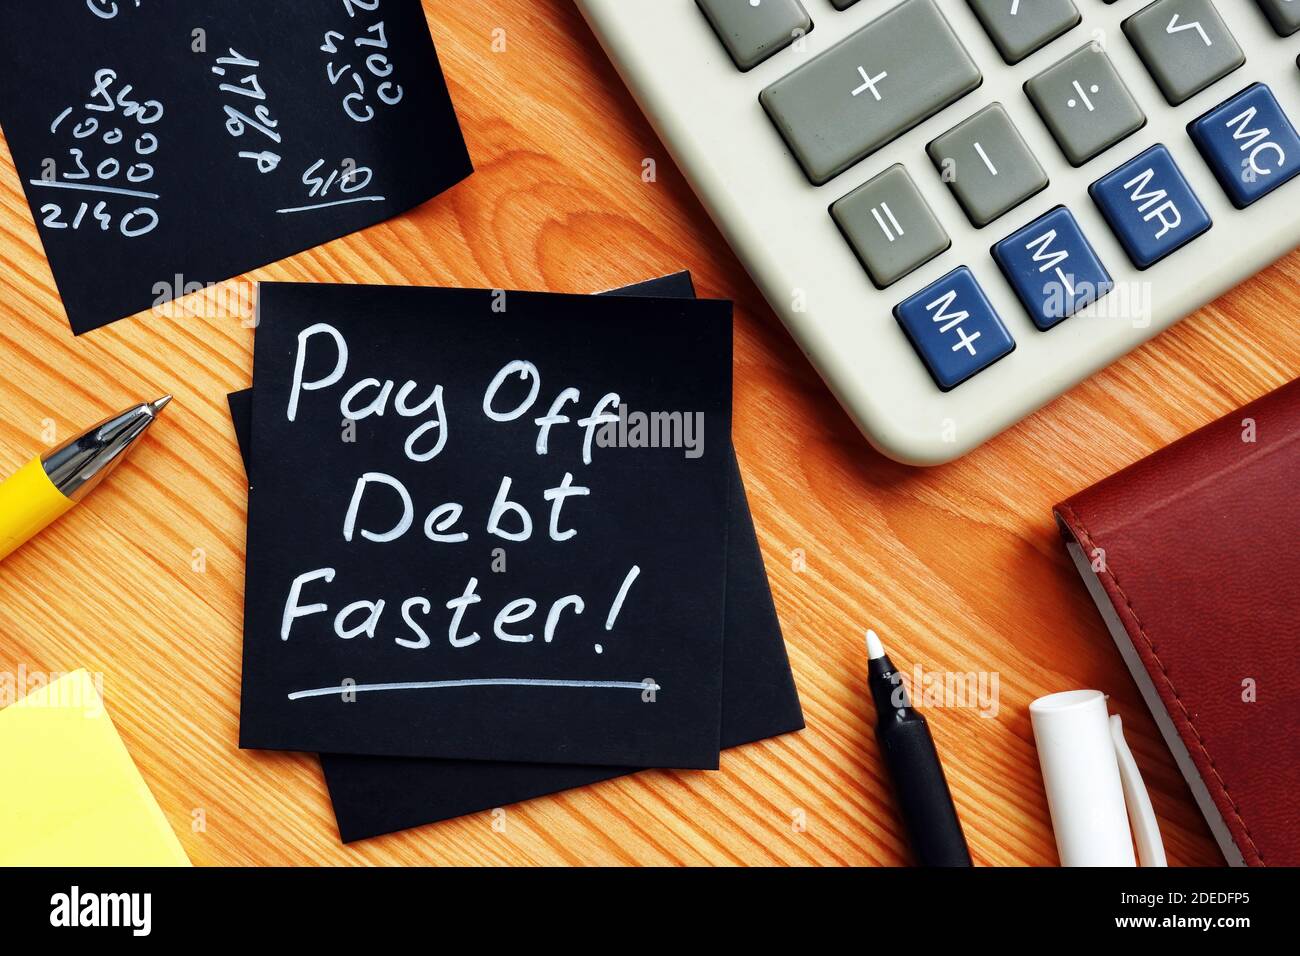 Pay off debt faster handwritten memo and calculator. Stock Photo